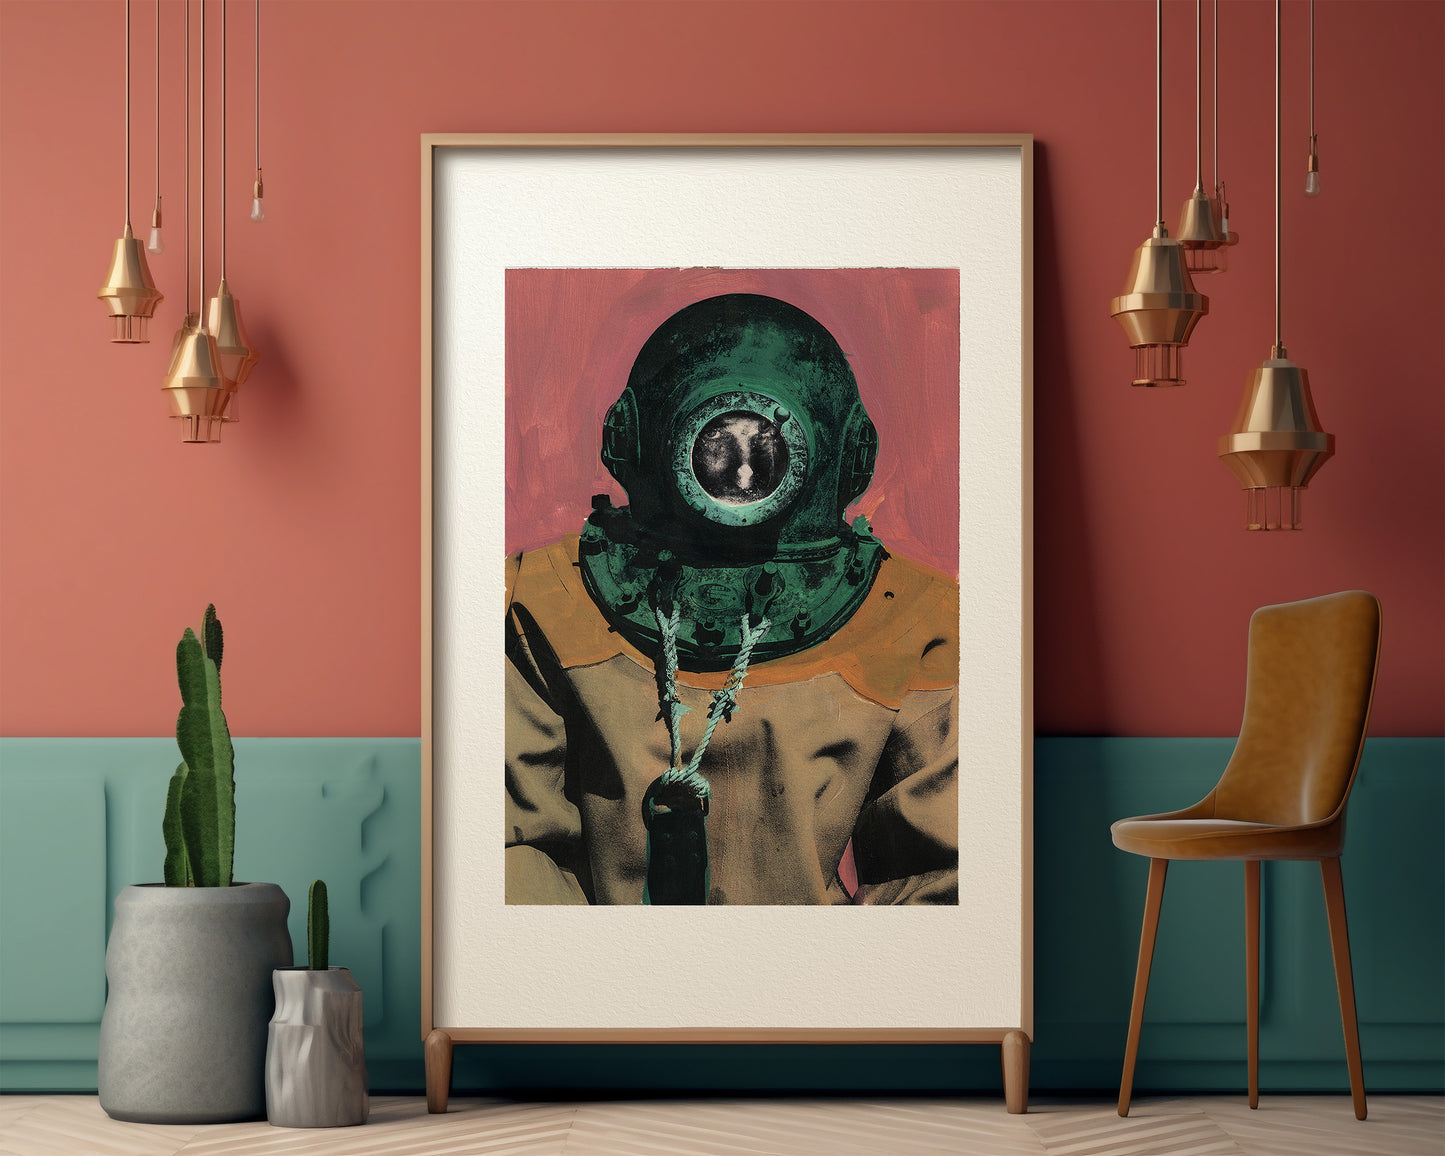 Painting Pop Art Wall Art from Greece | Pink & Green sponge diver from Kalymnos island, by George Tatakis - inside an eclectic room